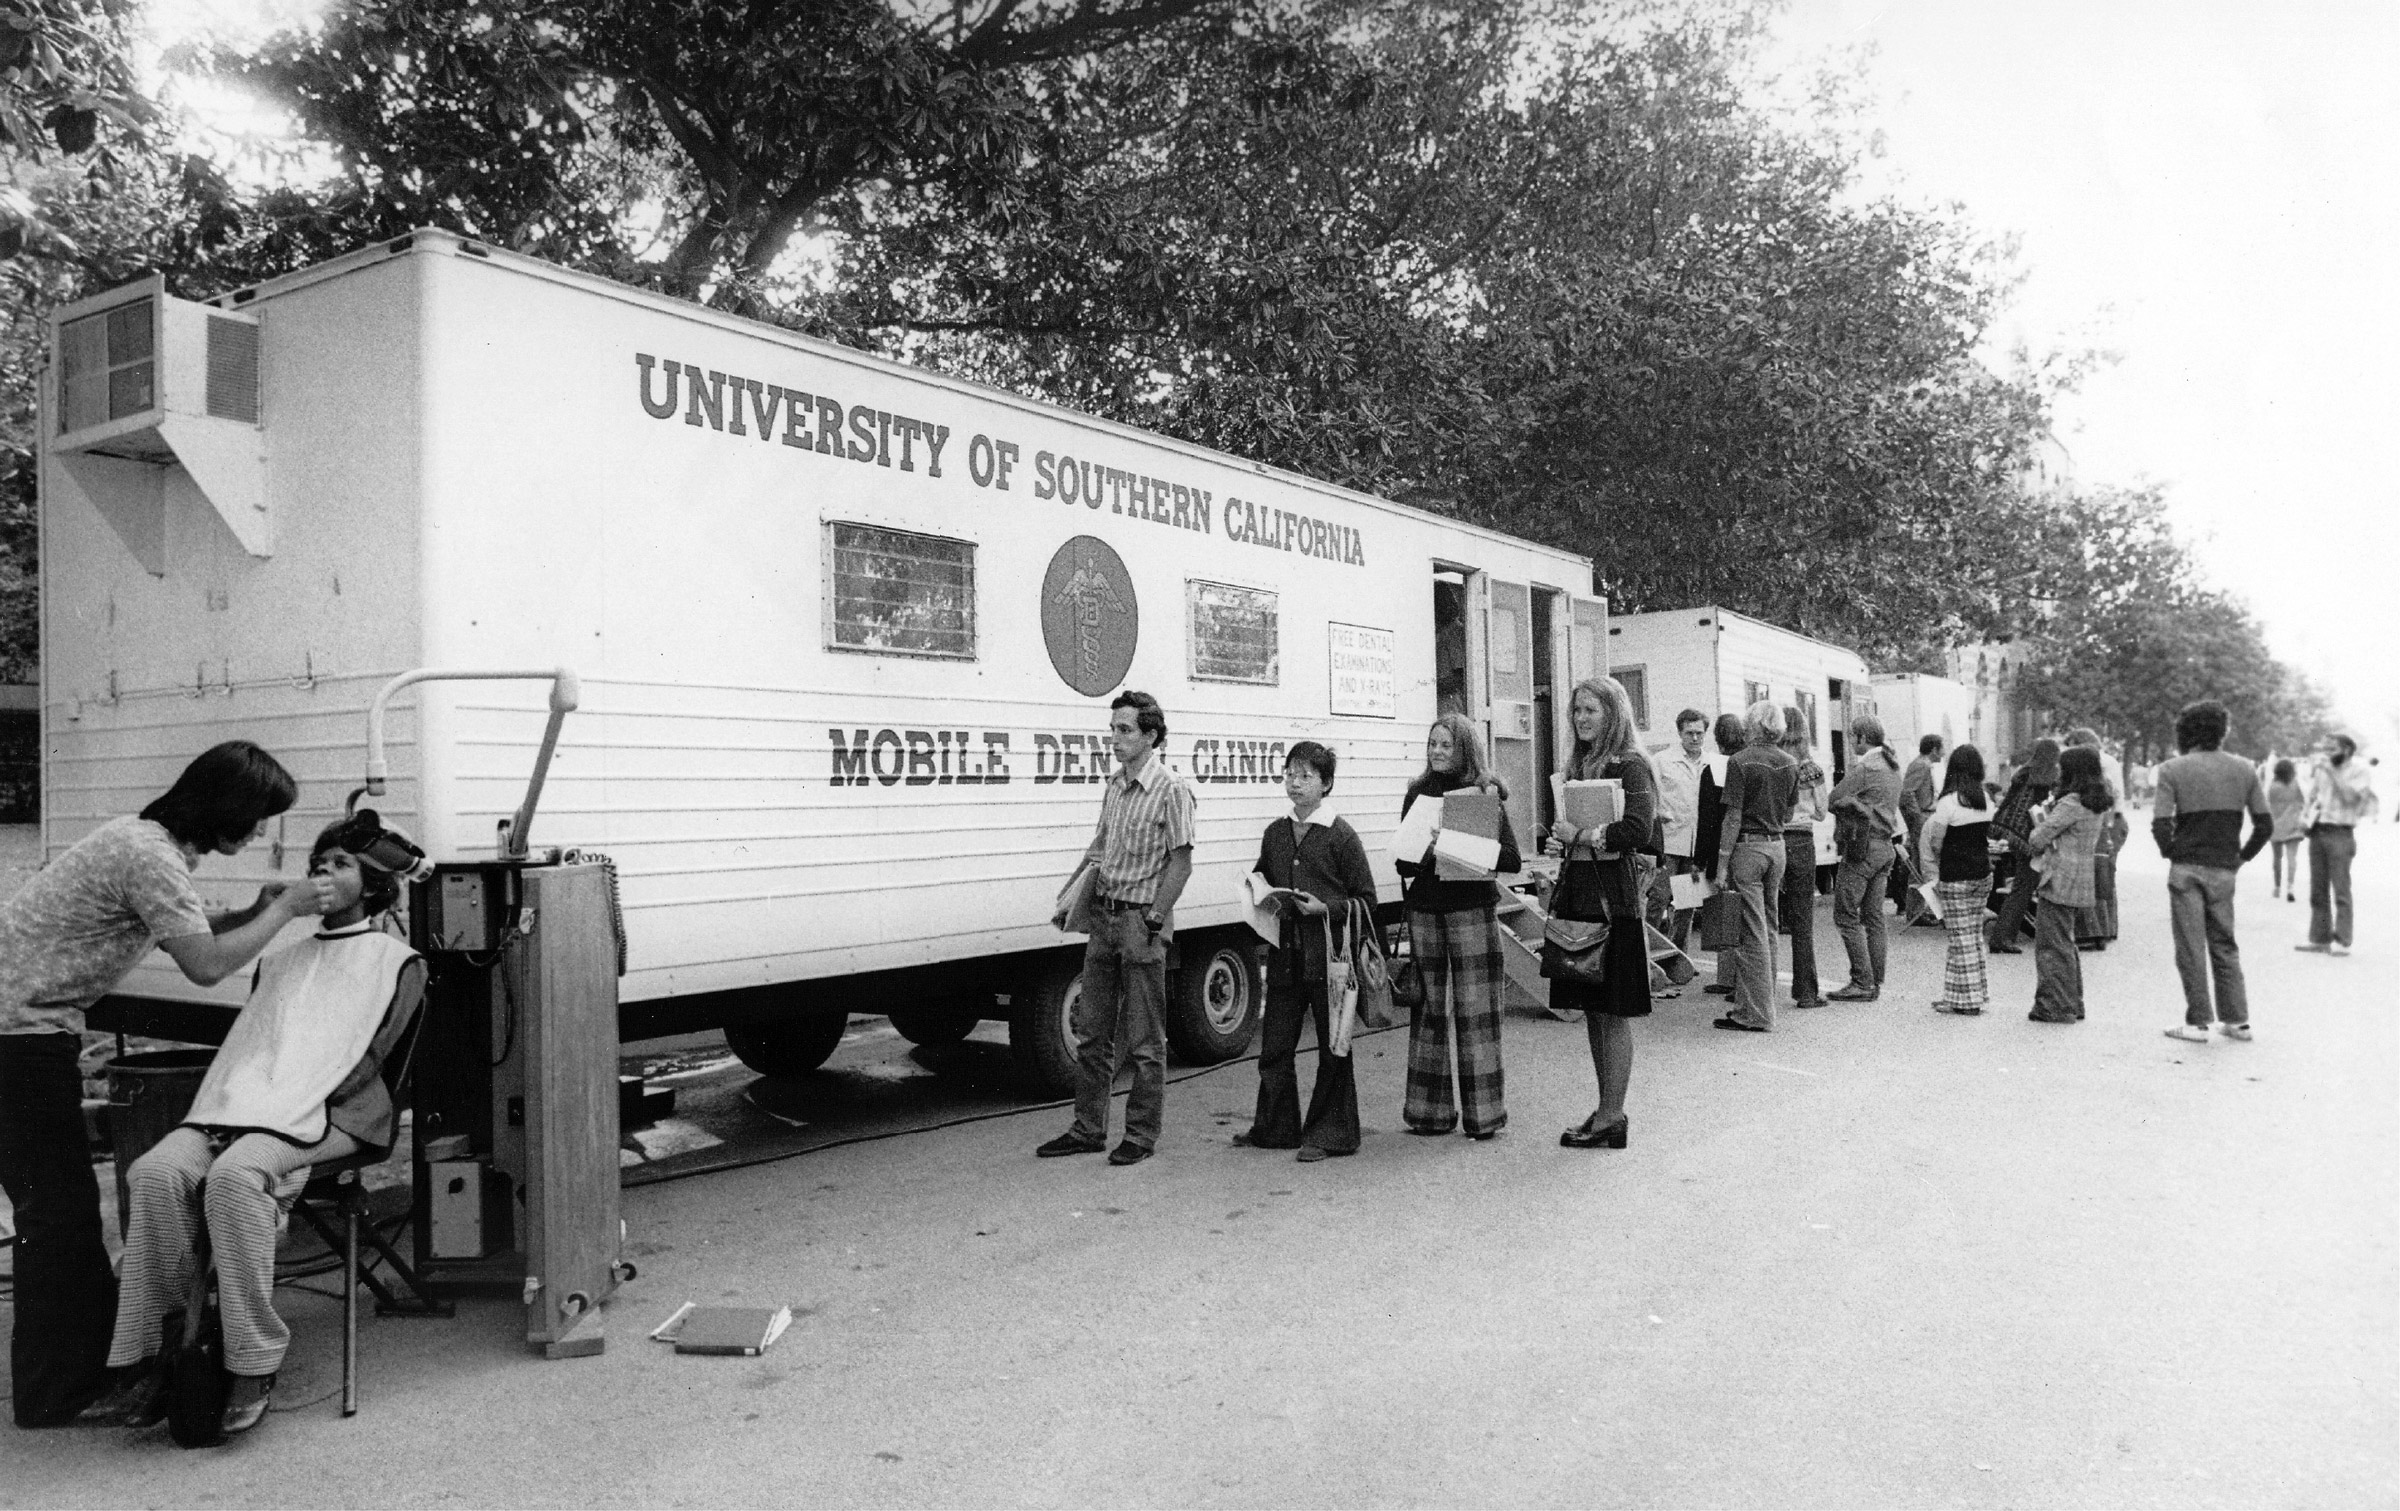 One of USC's first Mobile Dental Clinics, c. 1965 | USC Archives